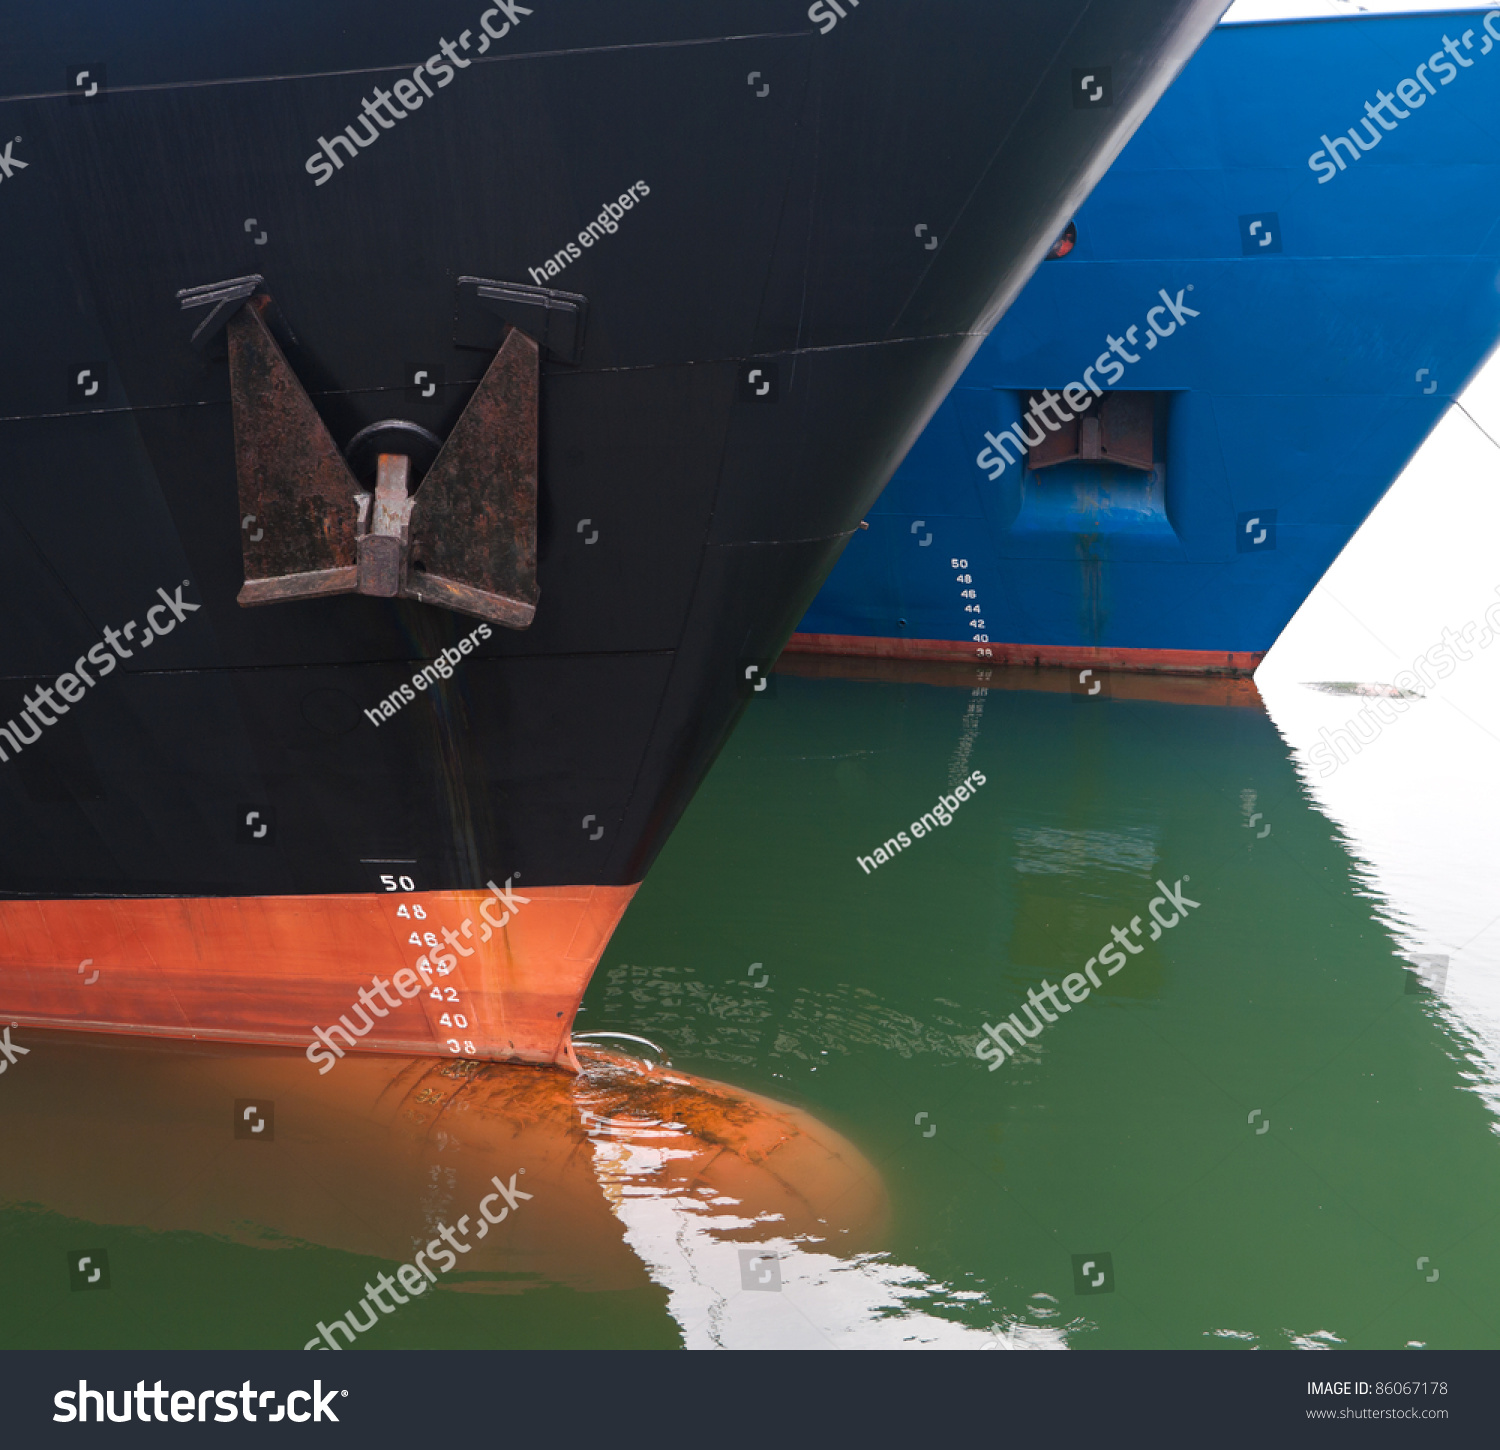 Bow Two Ships Draft Scale Numbering Stock Photo 86067178 - Shutterstock